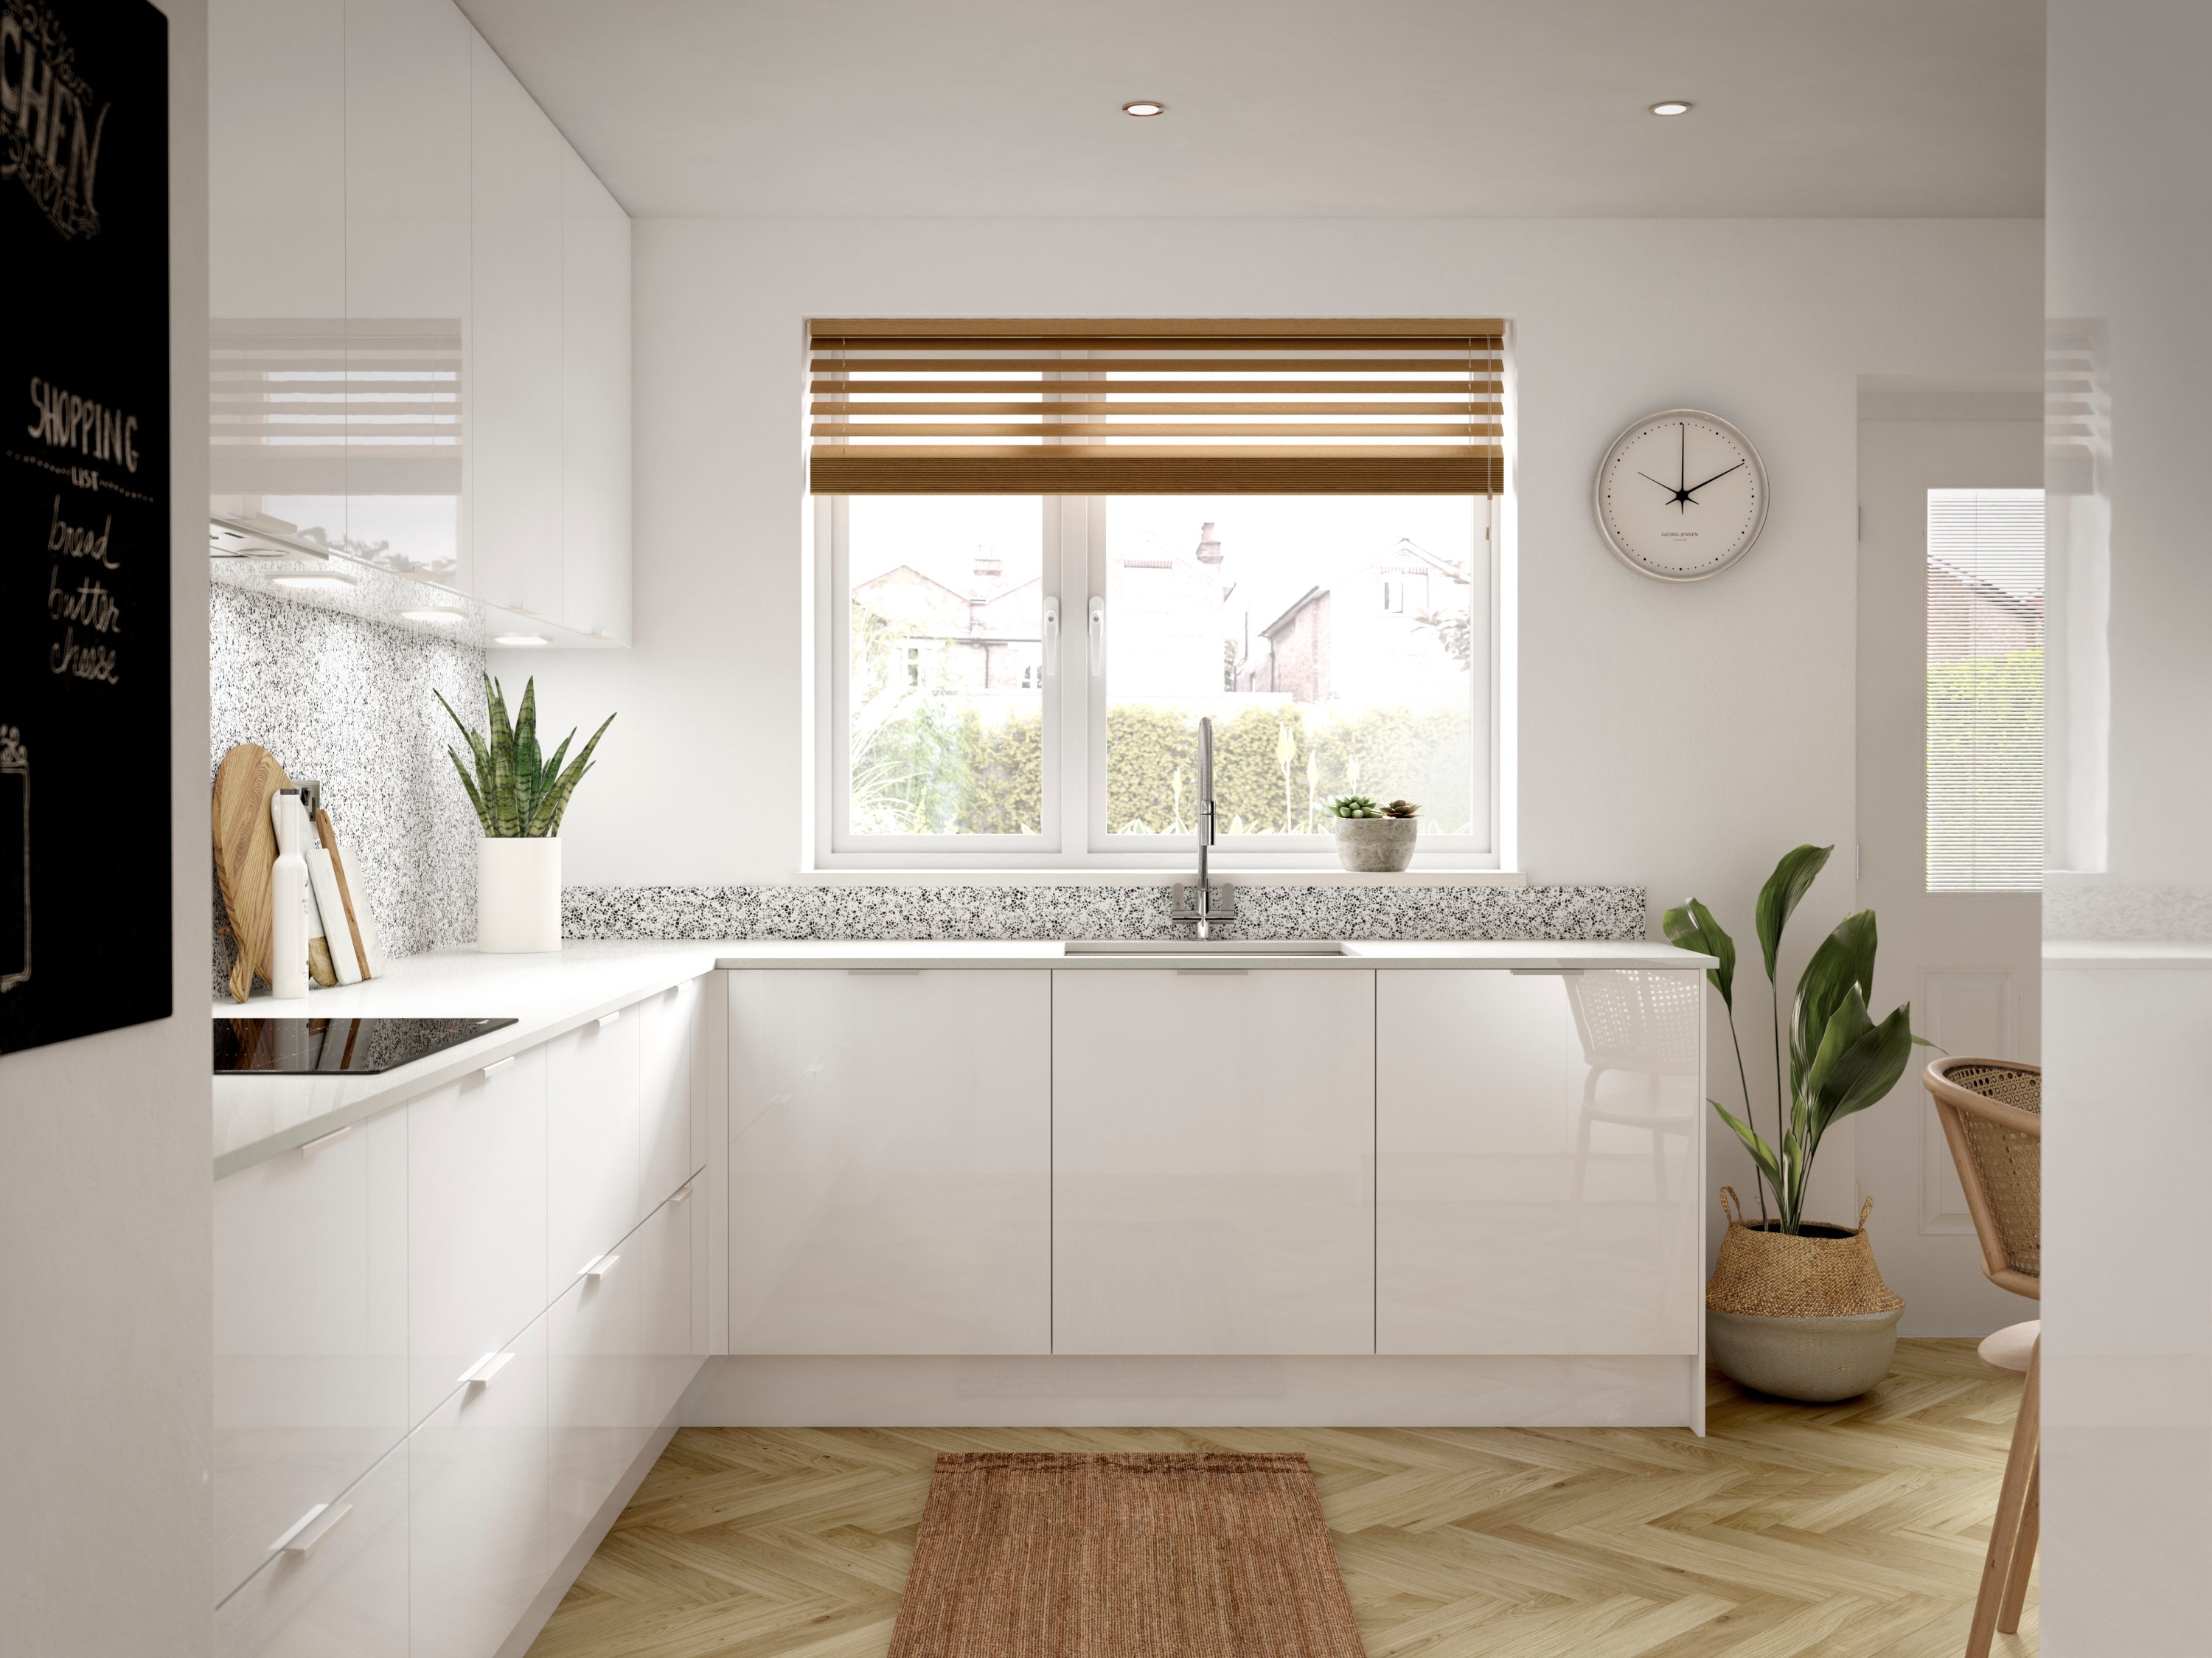 Designing a Small Kitchen   Second Nature